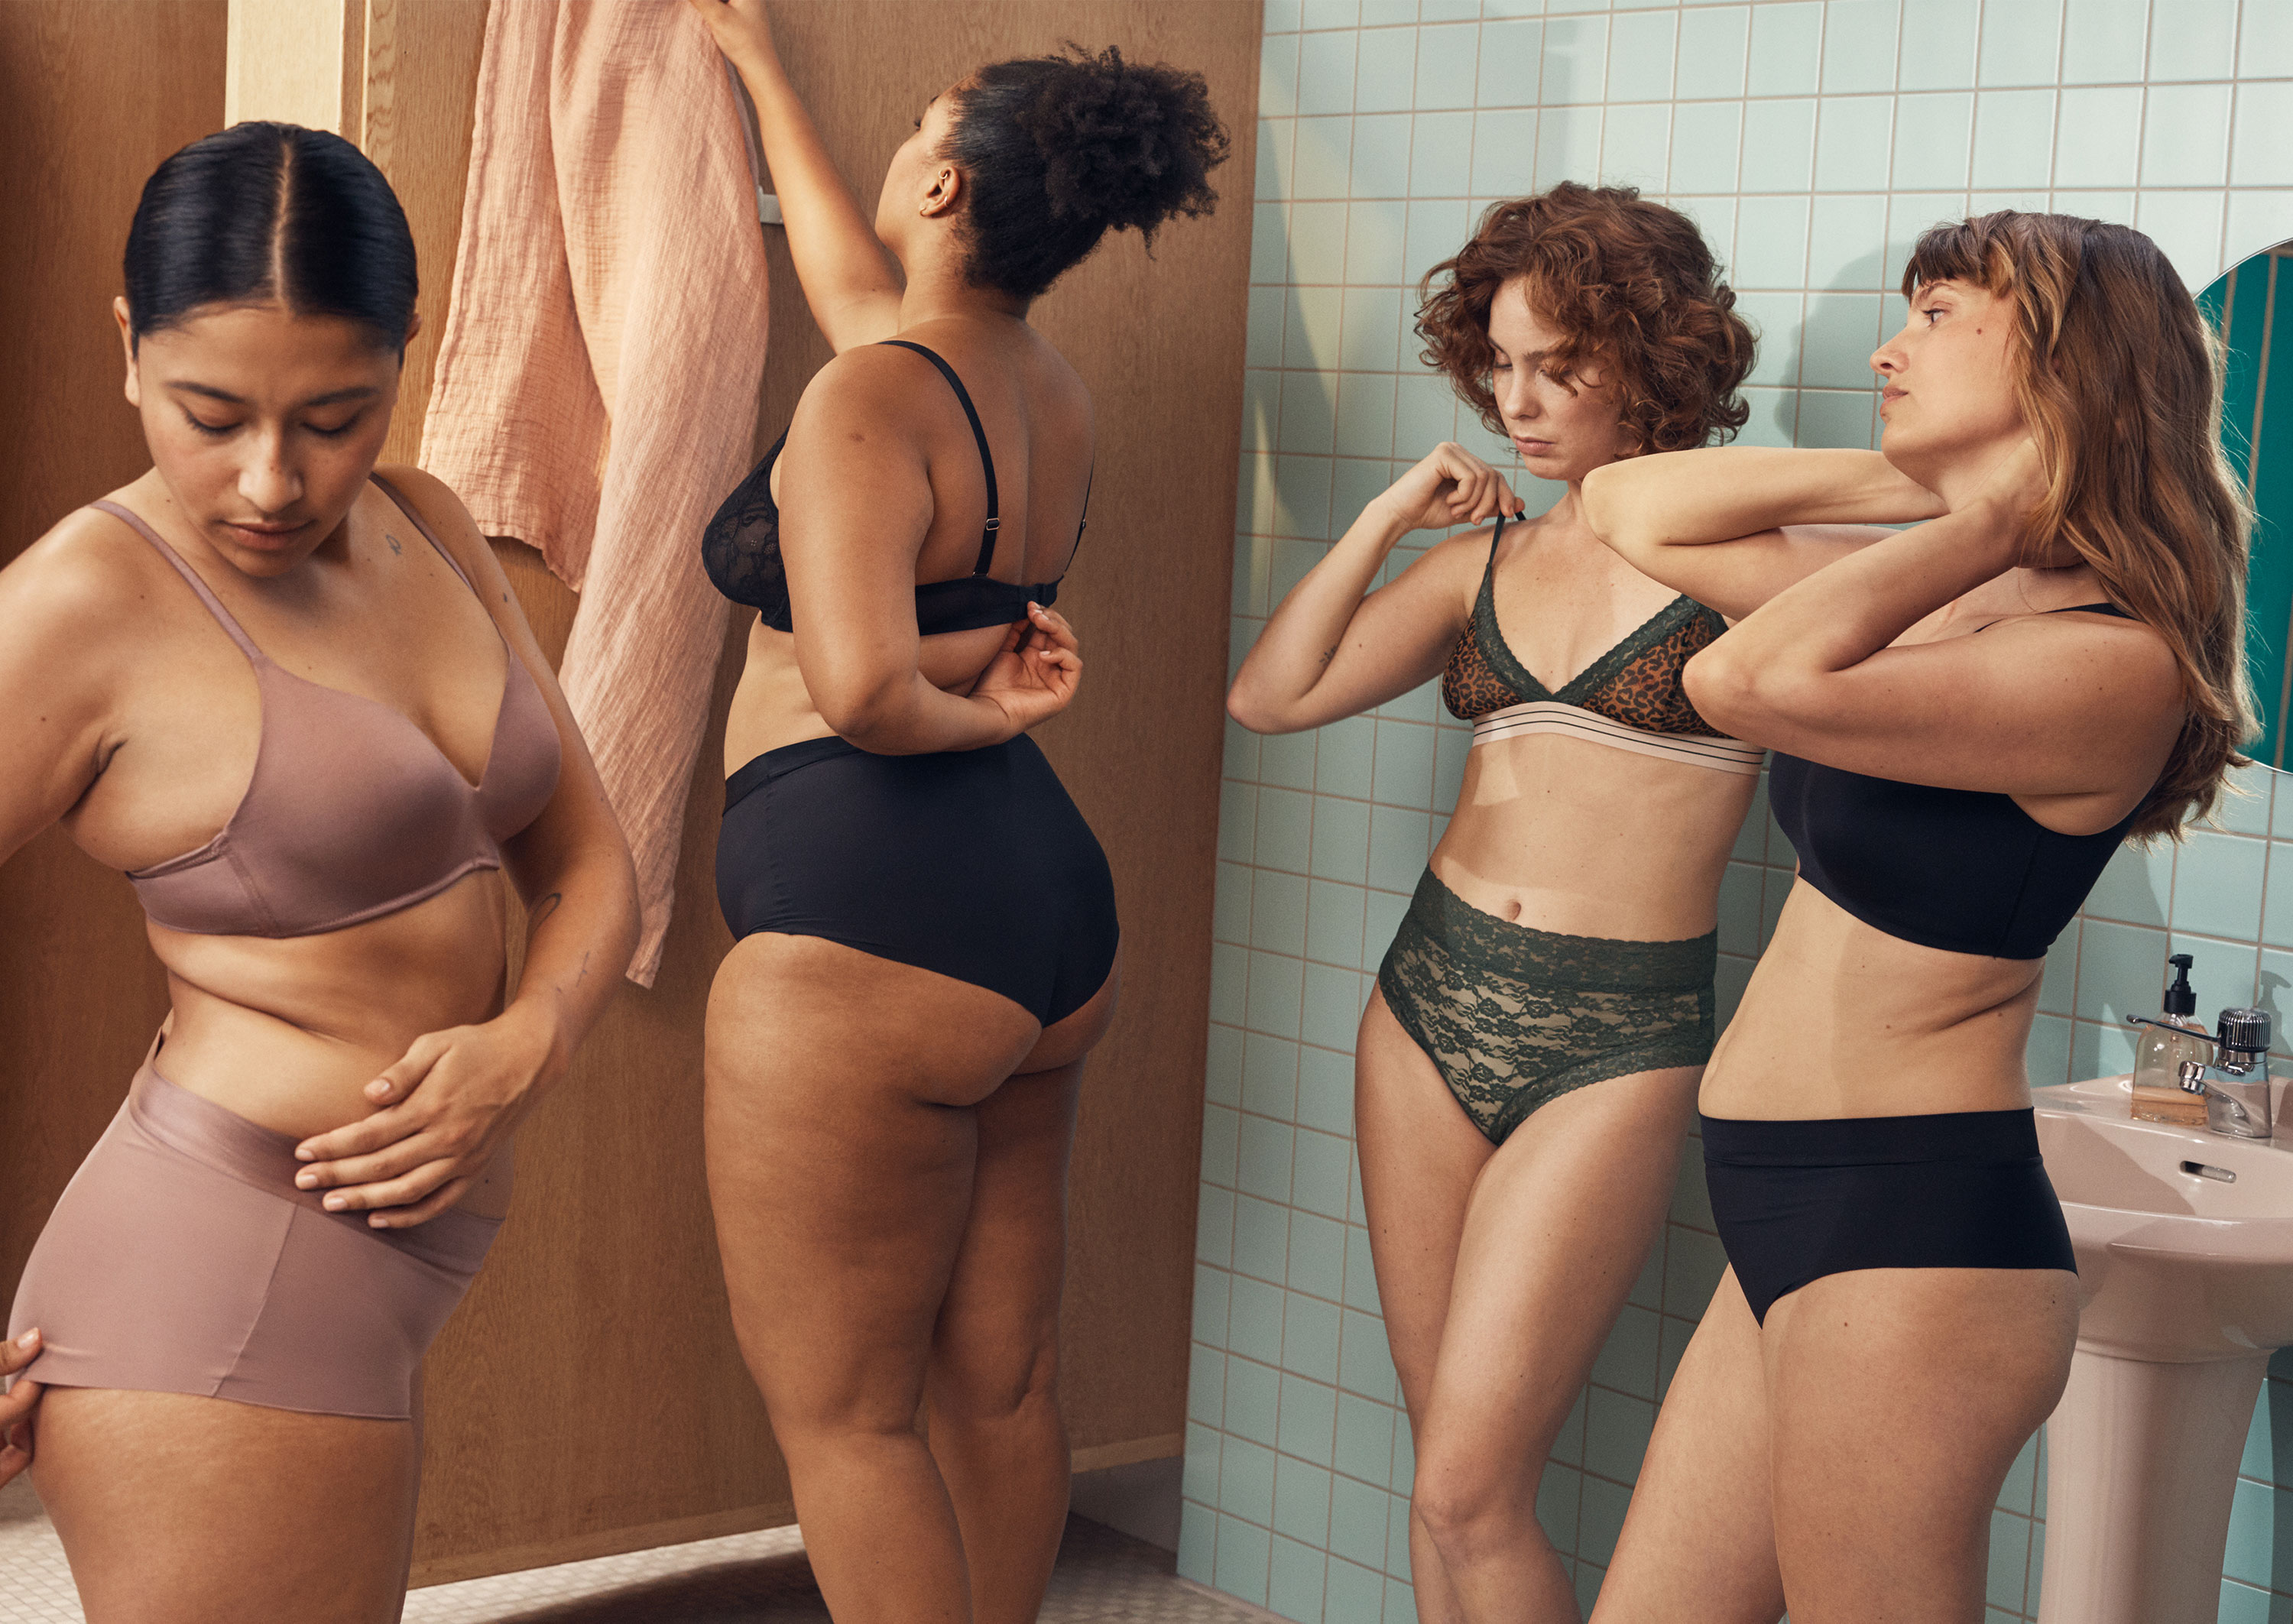 This spring's underwear campaign shows what Lindex stands for